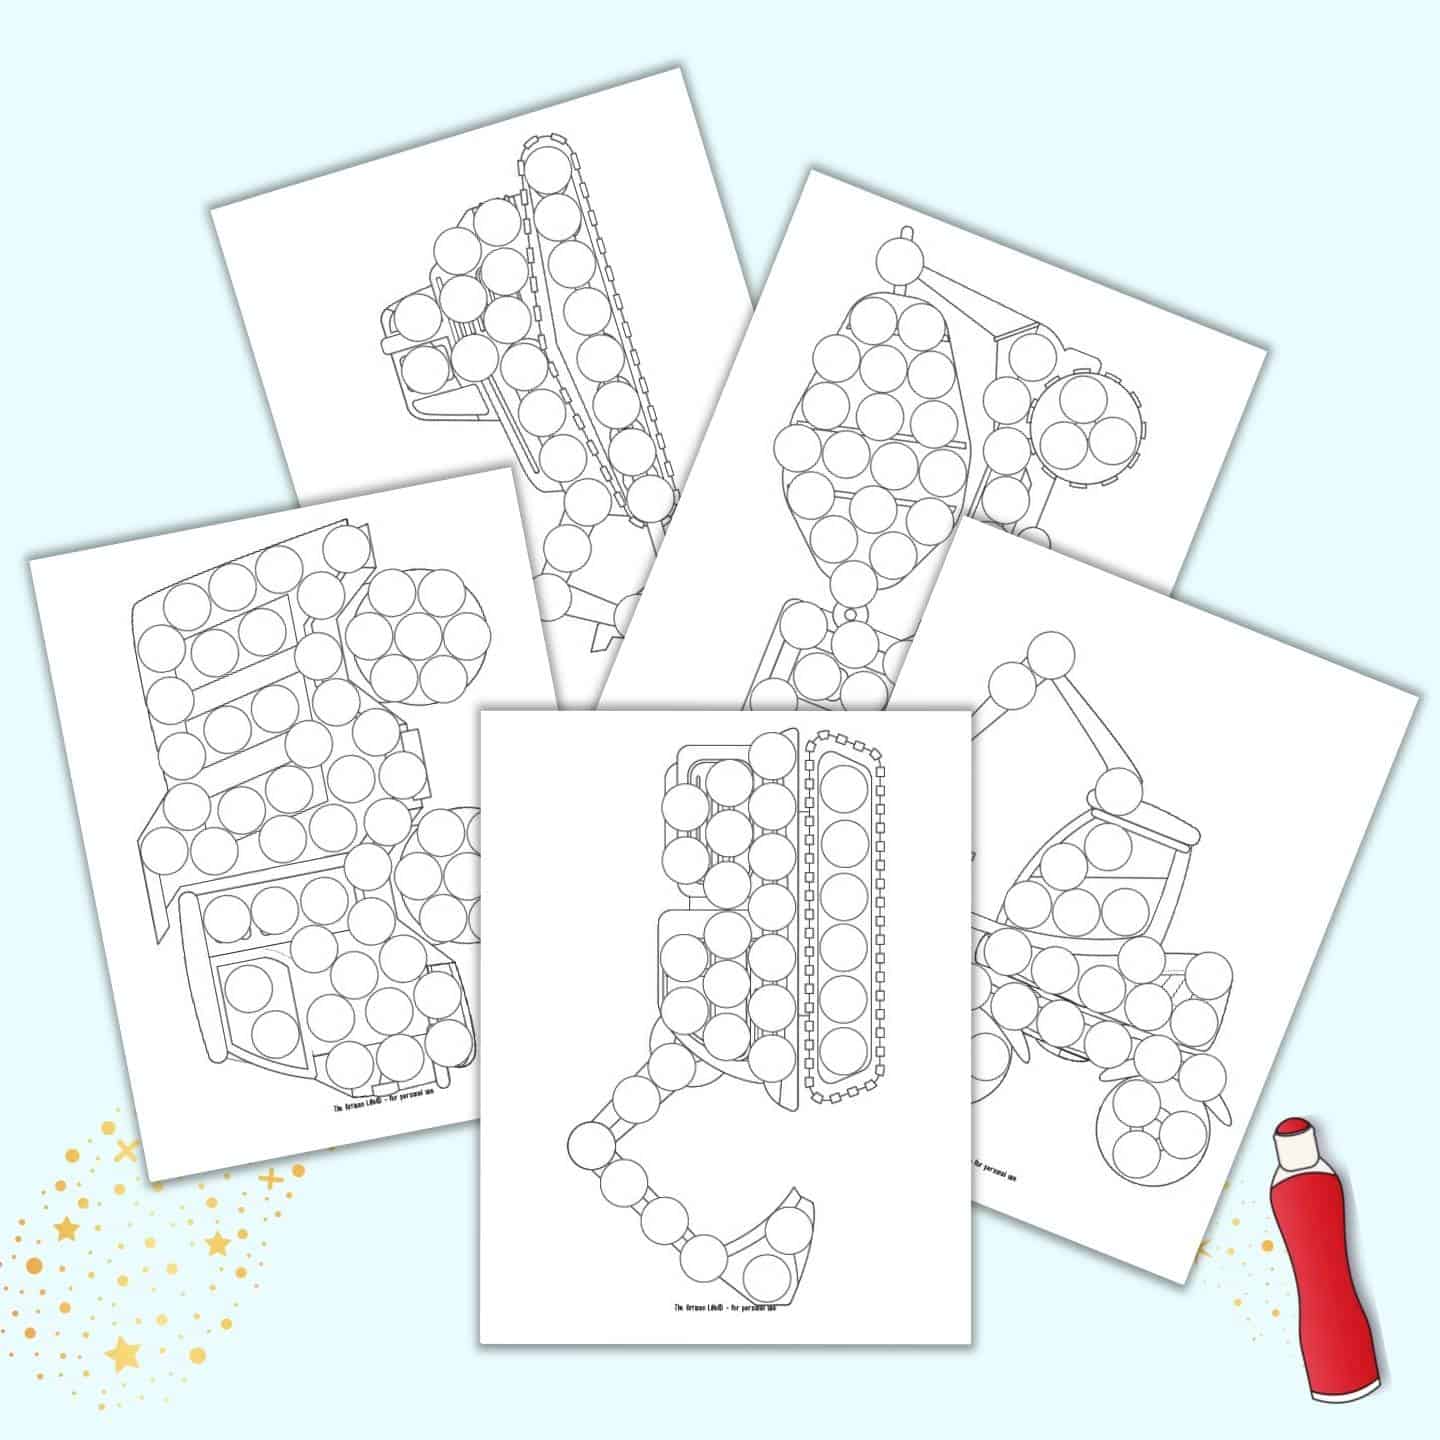 Free Printable 9 Dots Per Inch Black Dot Paper with Margin · InkPx